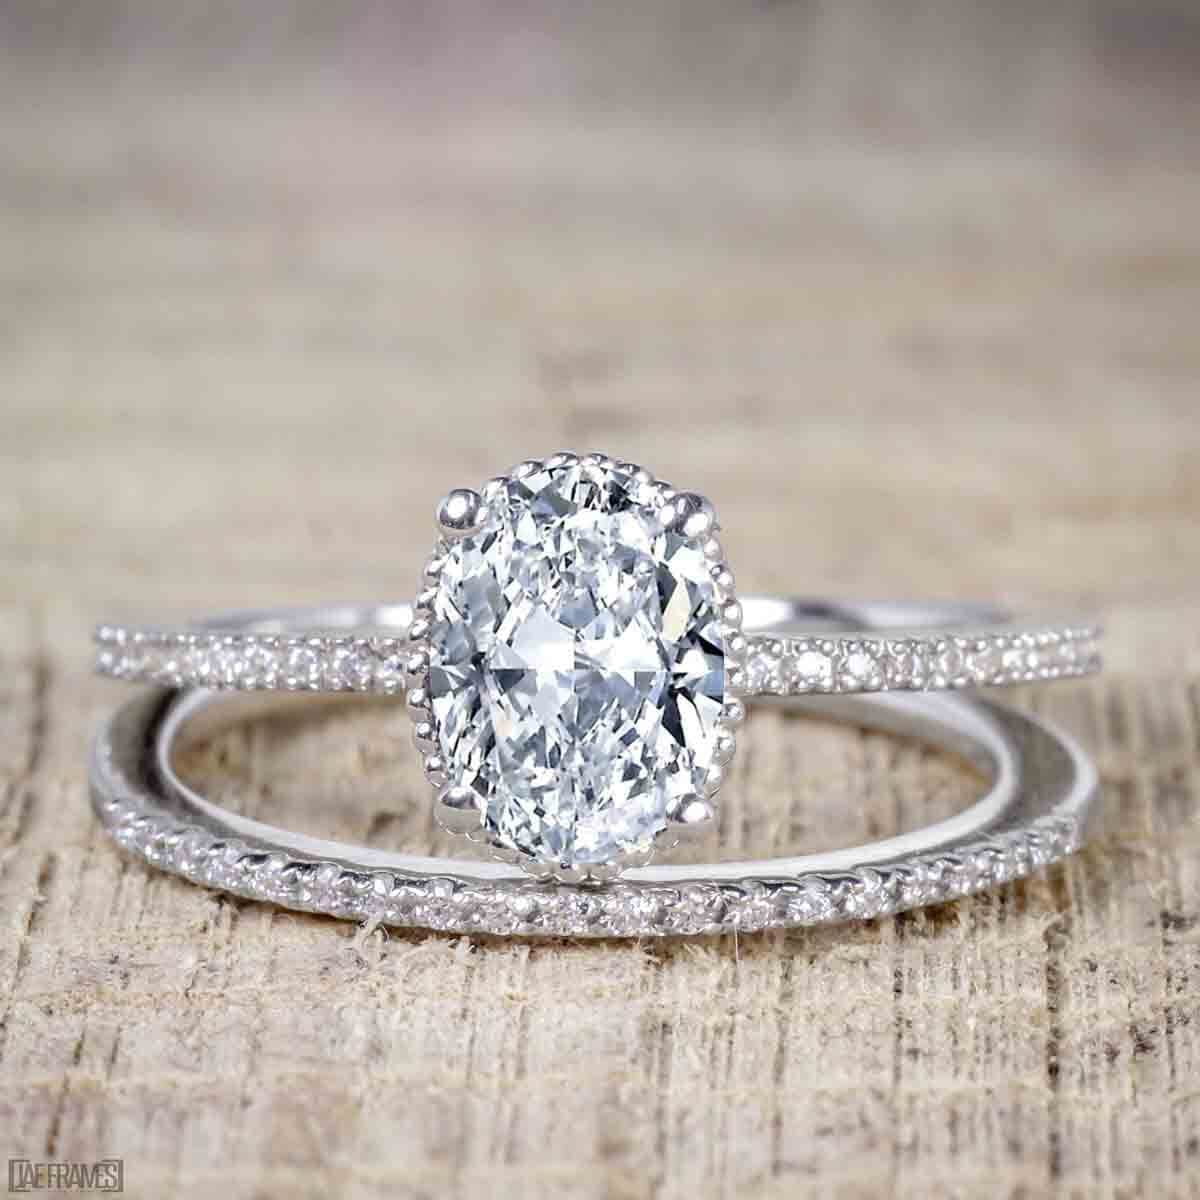 Vintage Atr Deco 3.5 Ct Oval Cut Diamond Engagement Antique Ring in 925 Silver 